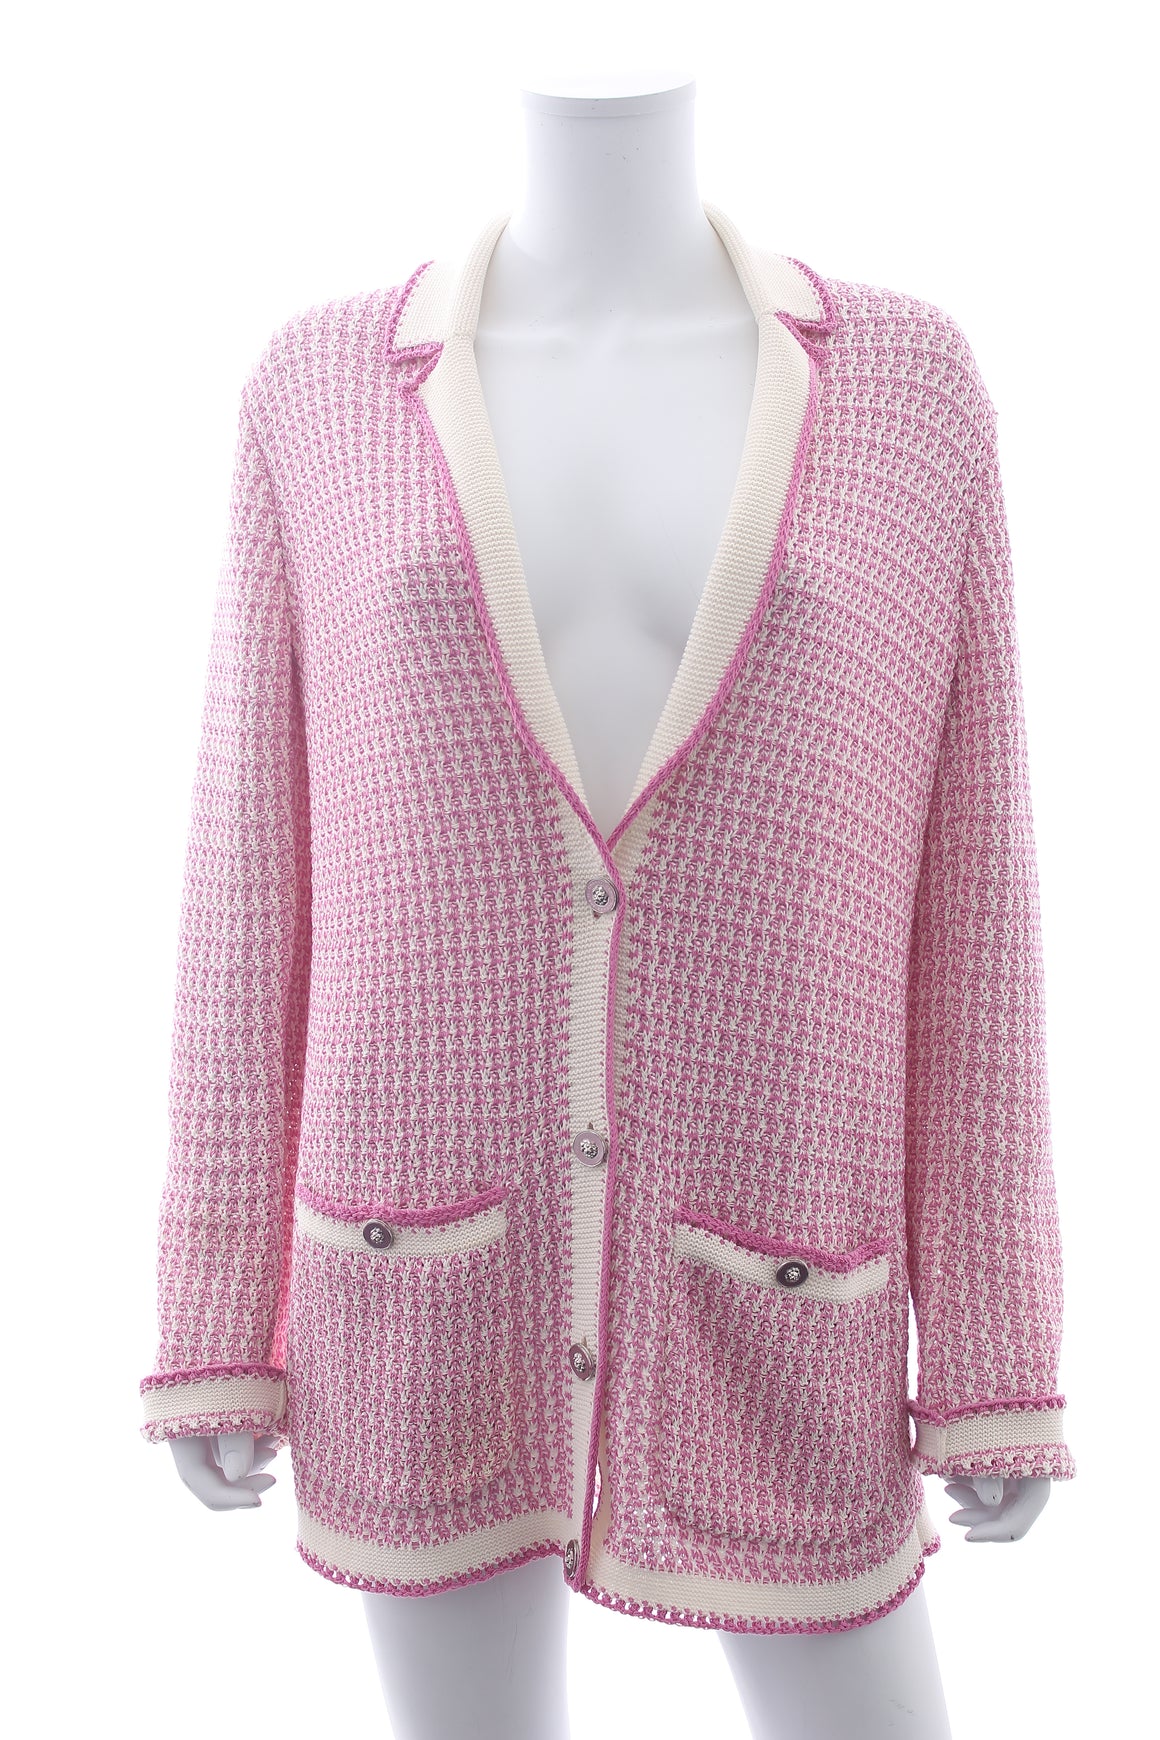 Chanel Cotton Knitted Cardigan